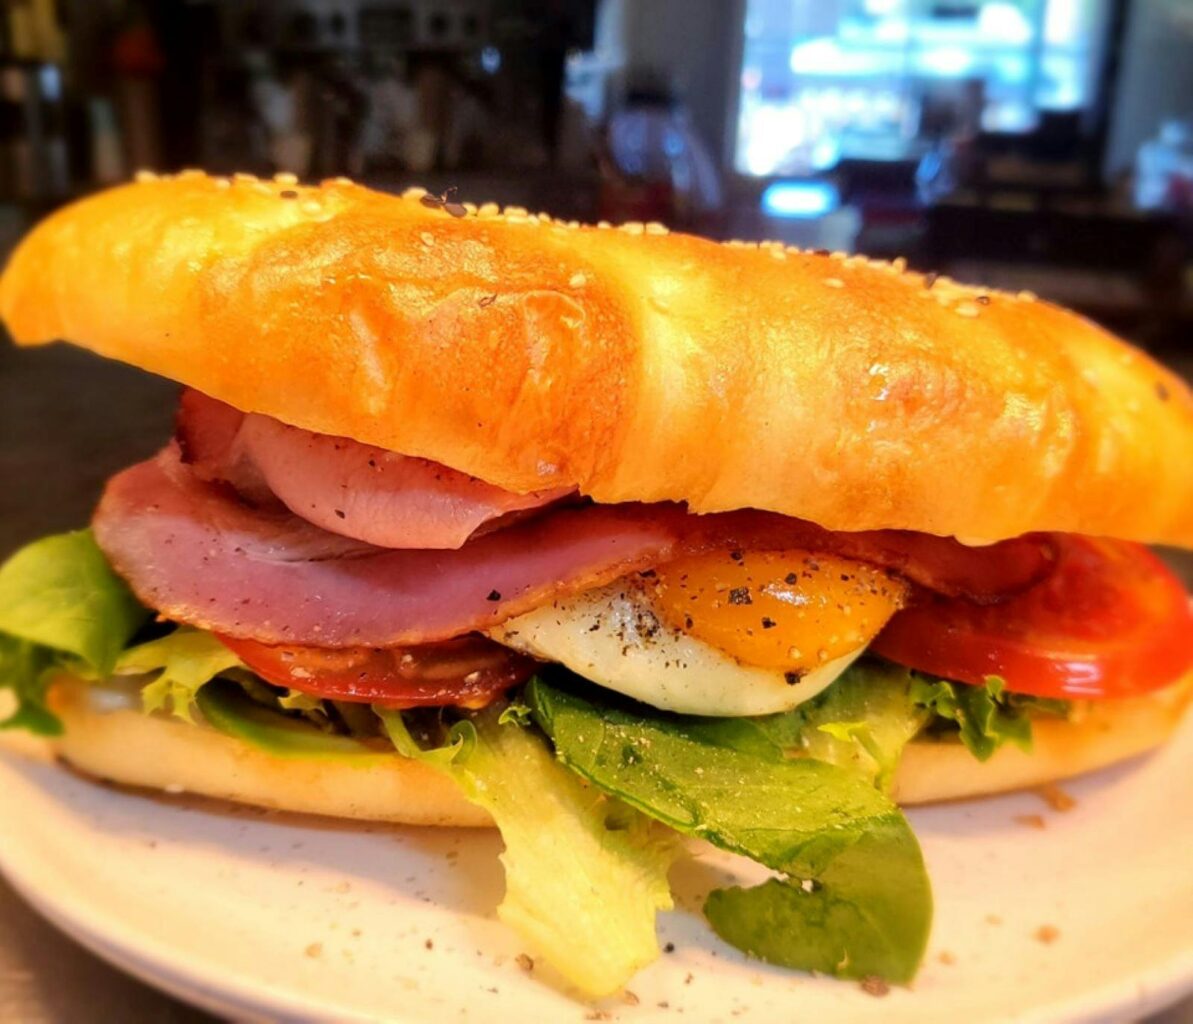 BLT with fried egg served on a freshly baked turkish roll